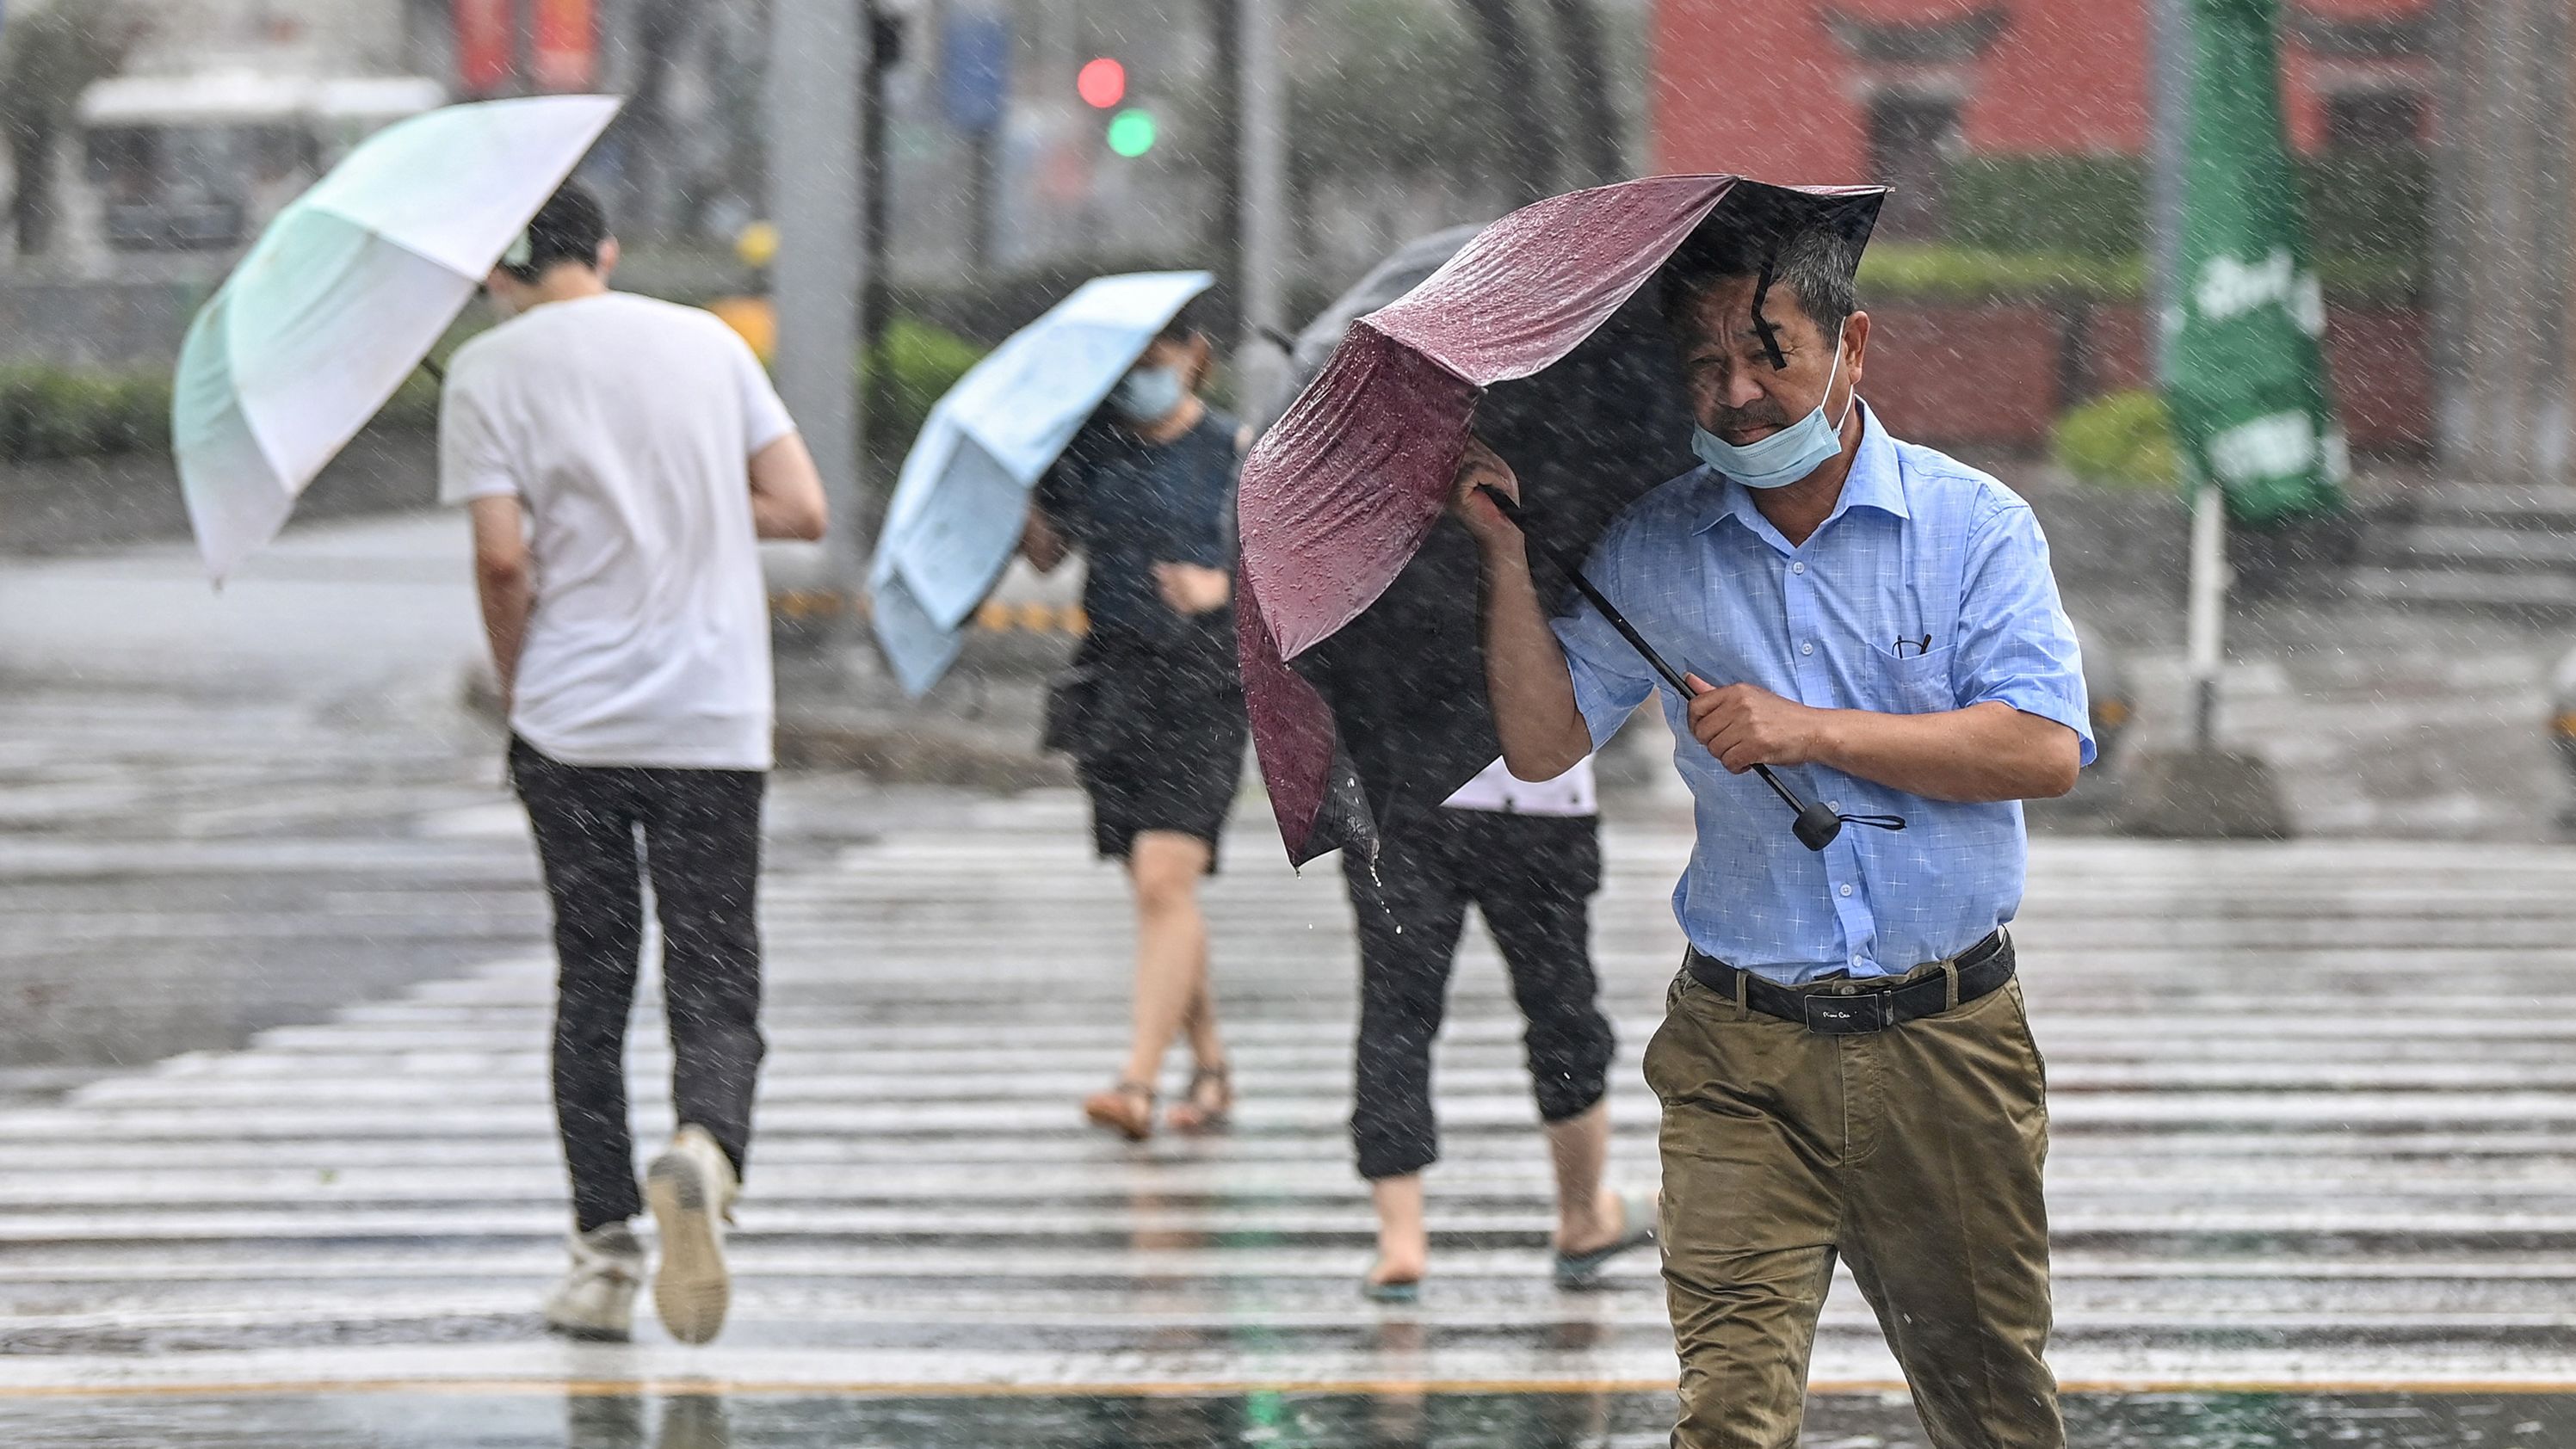 People cross the street in the wind and rain in Ningbo on July 25, as Typhoon In-Fa lashes the east coast of China.